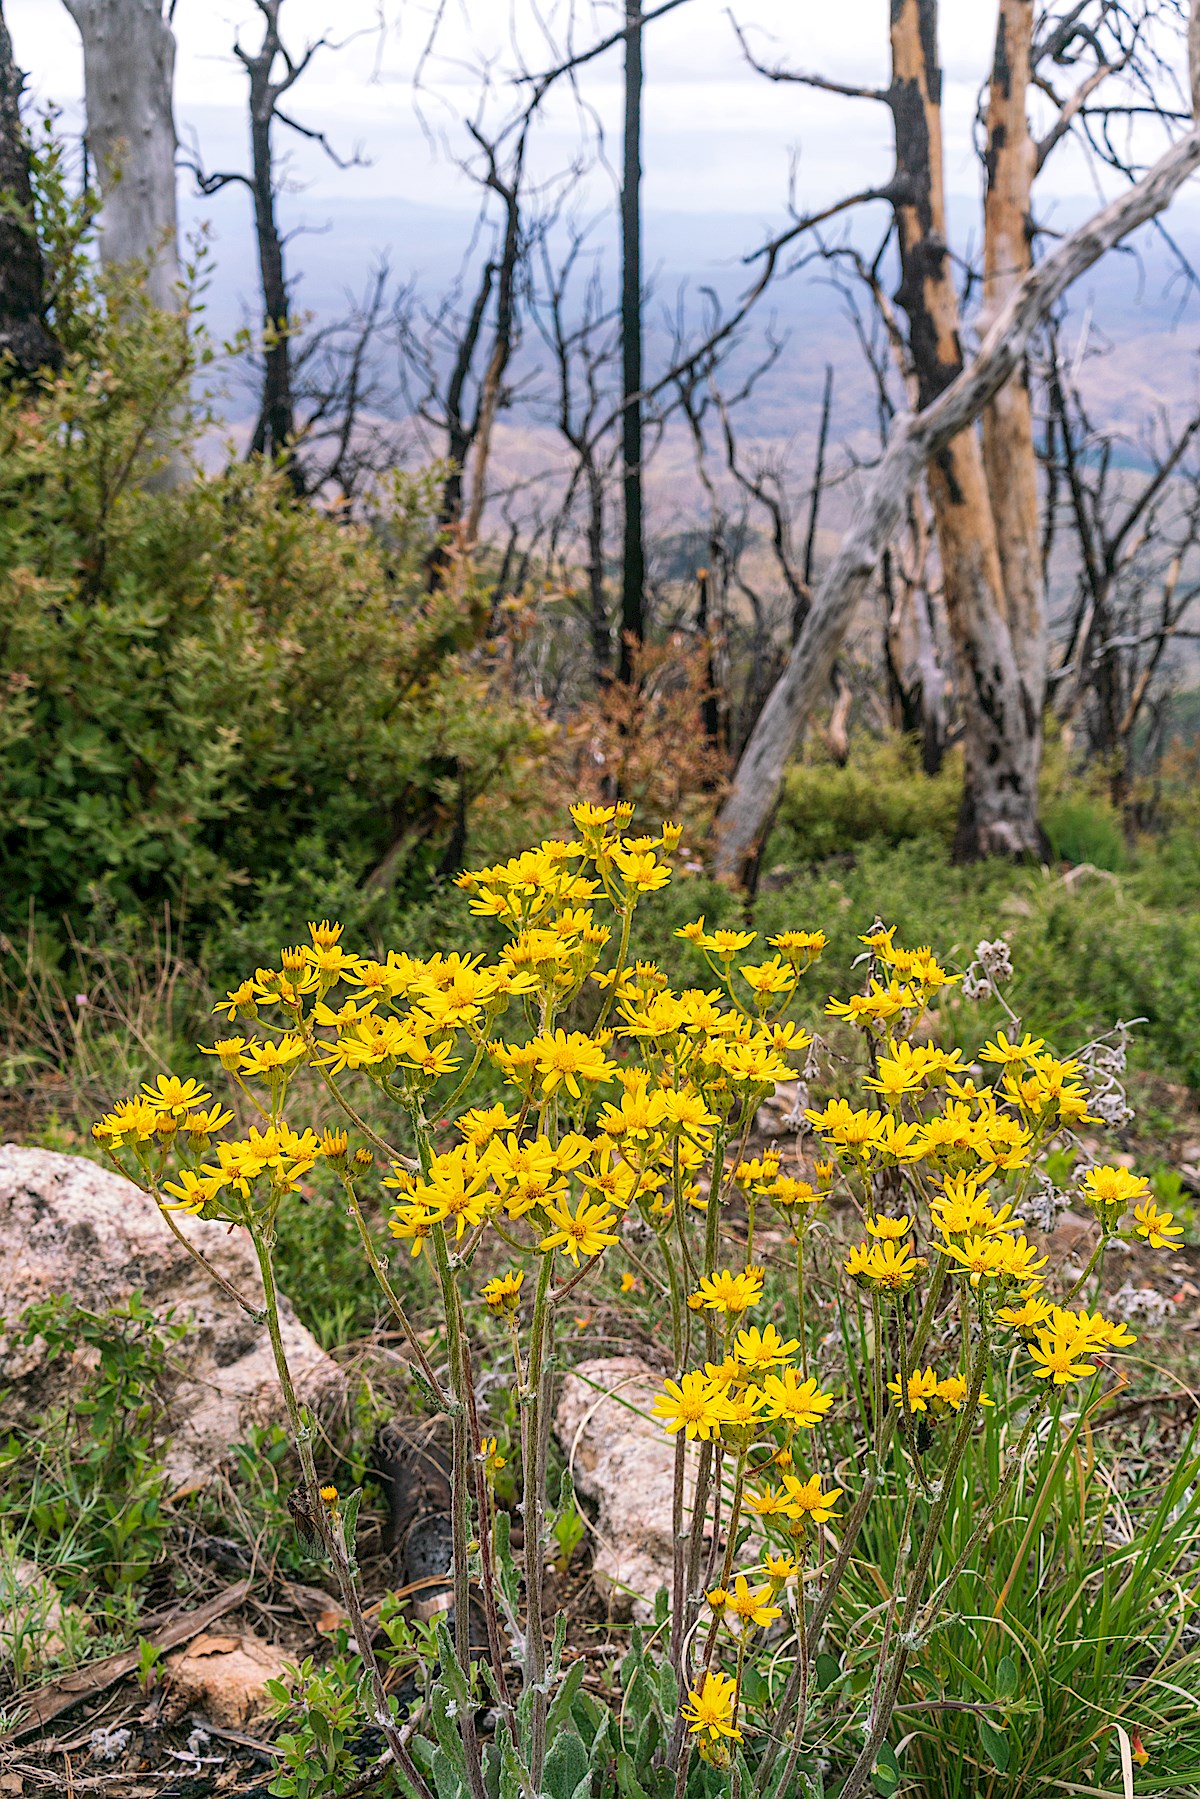 Flowers growing in and area burned by the Burro Fire. May 2019.